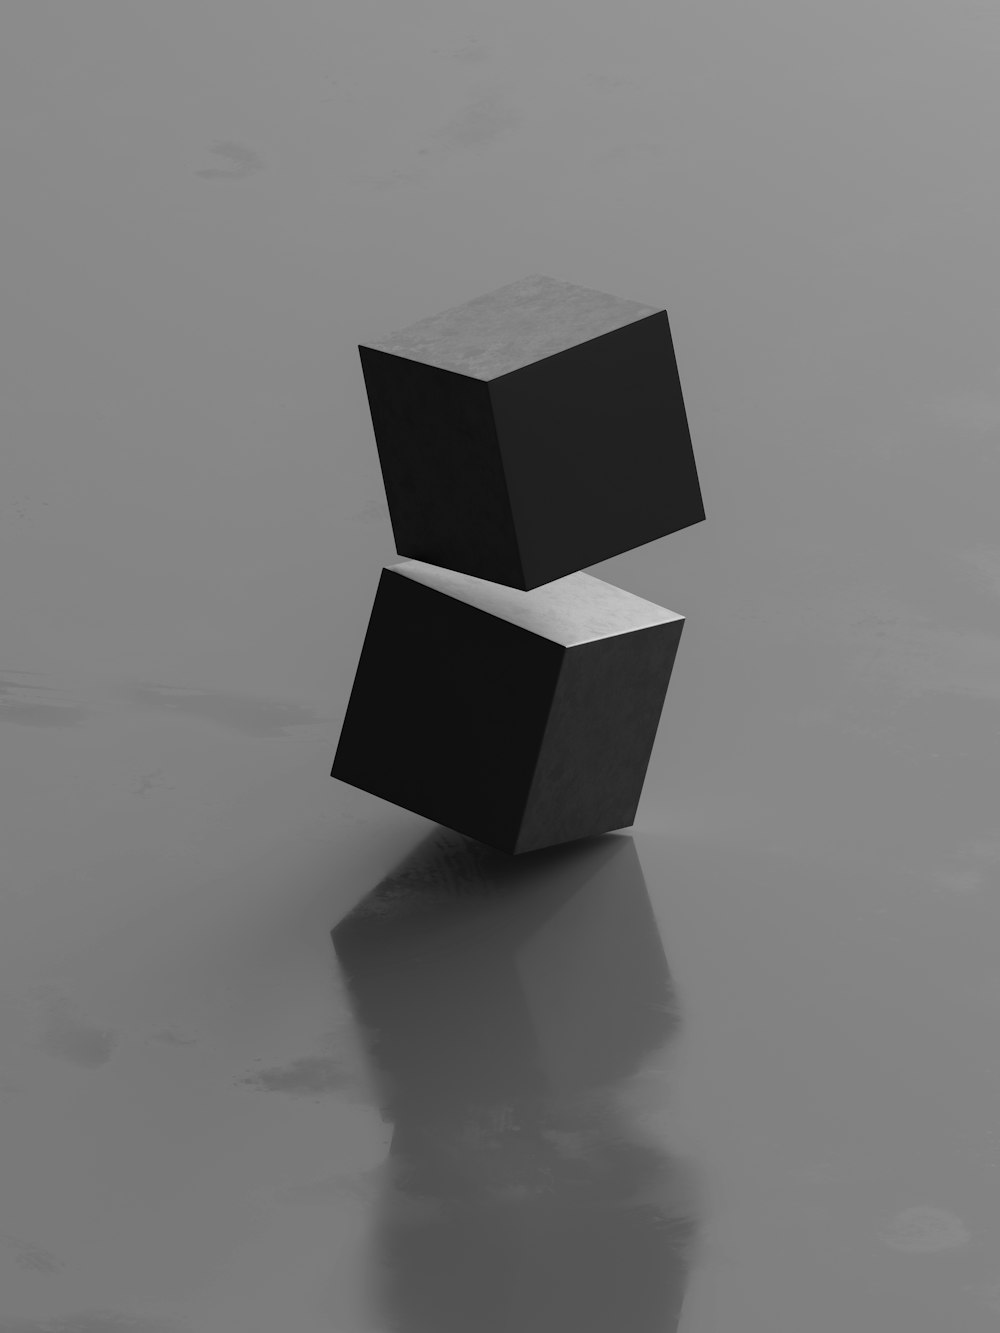 a black and white photo of a cube